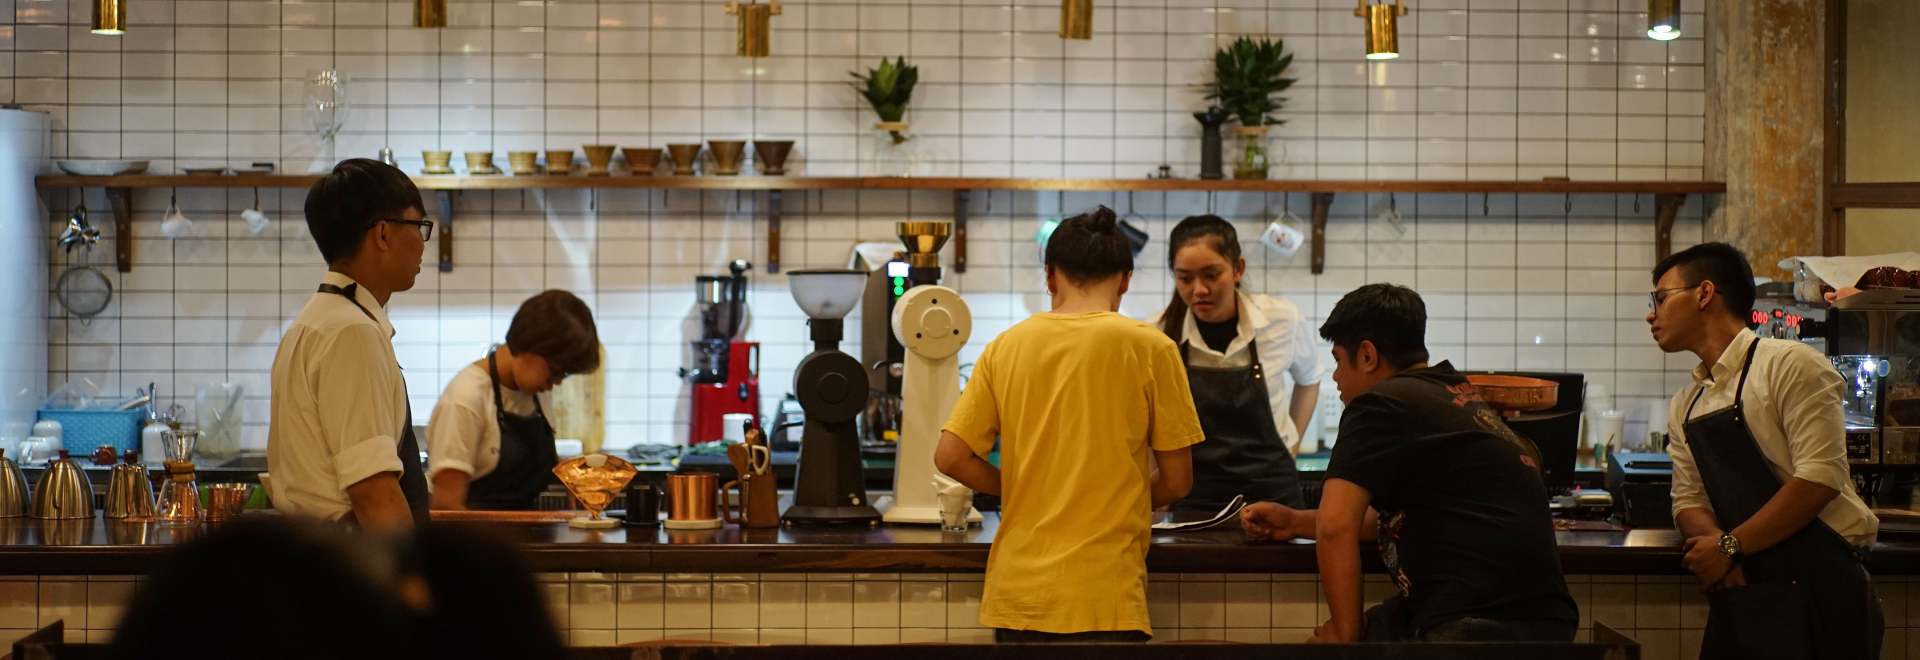 The journey from barista to café owner